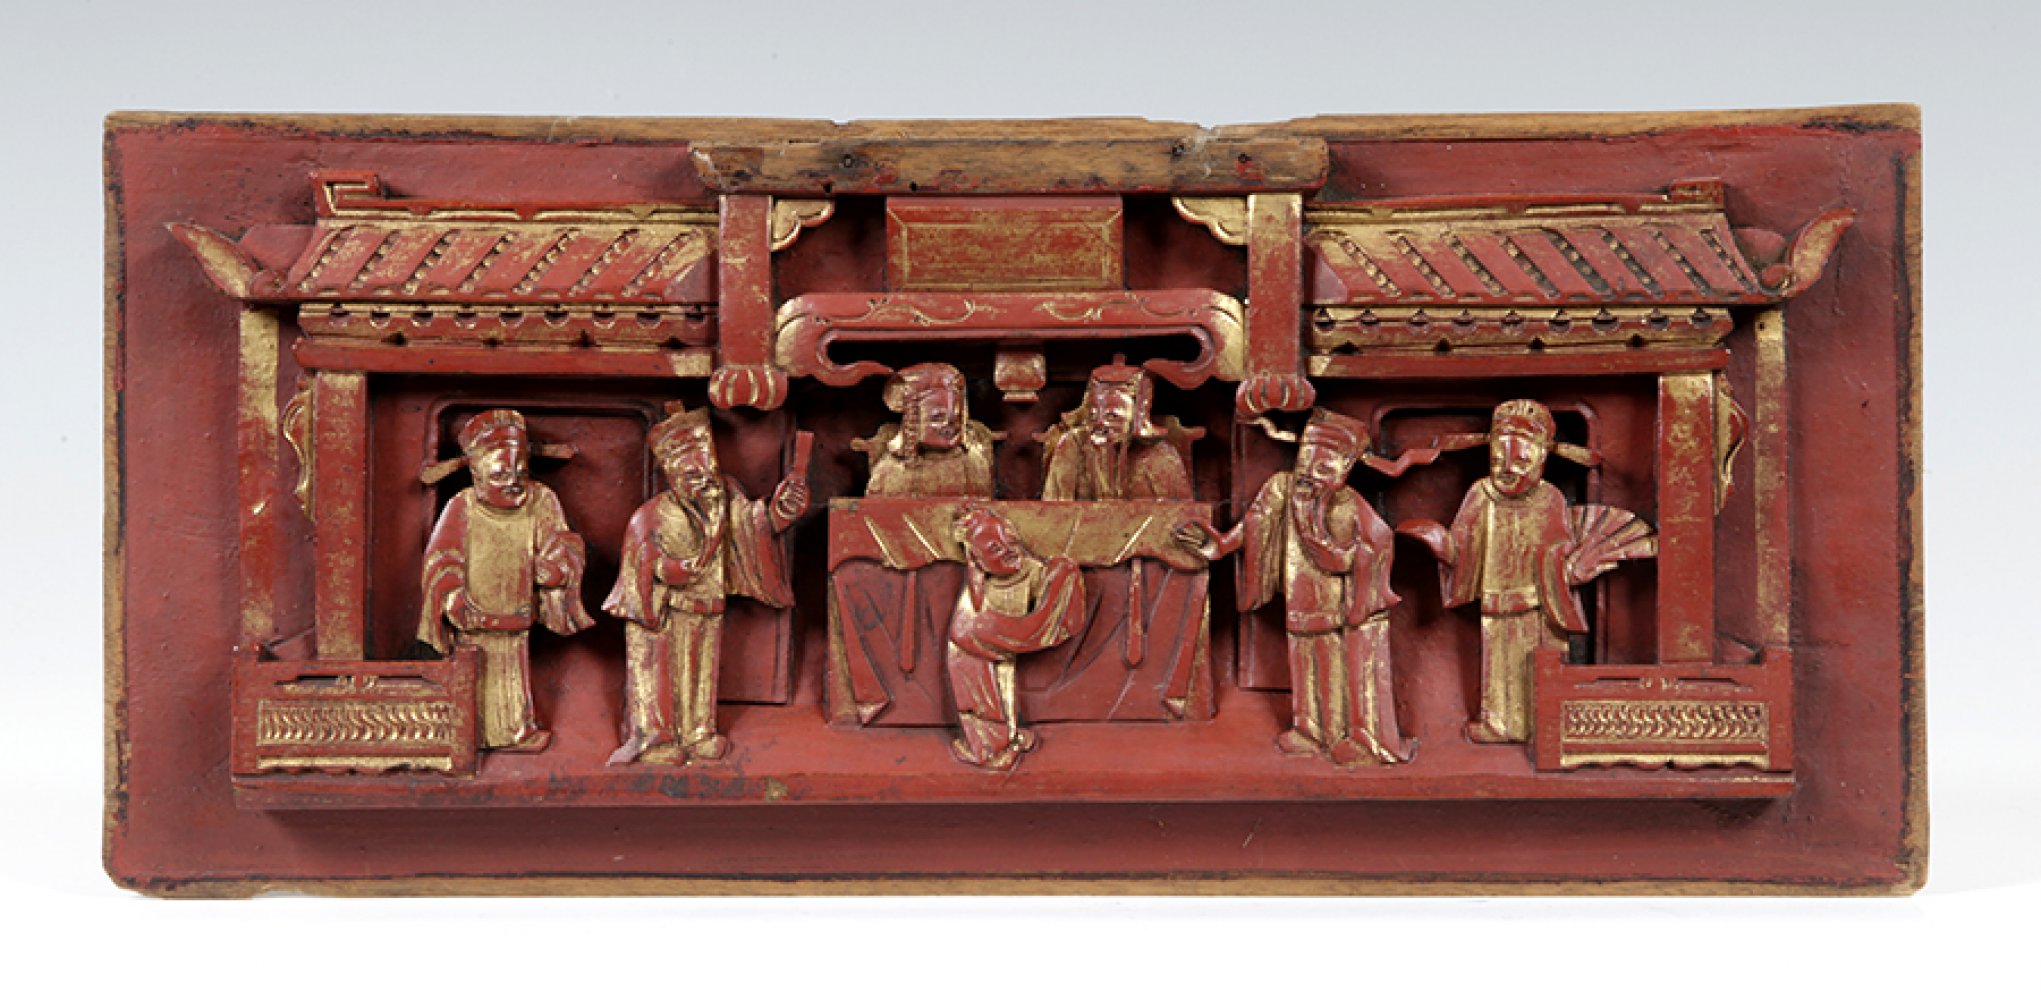 Ornamental frieze; China, Qing dynasty, 19th century.Carved and lacquered wood.Size: 17 x 38 x 2 - Image 2 of 3